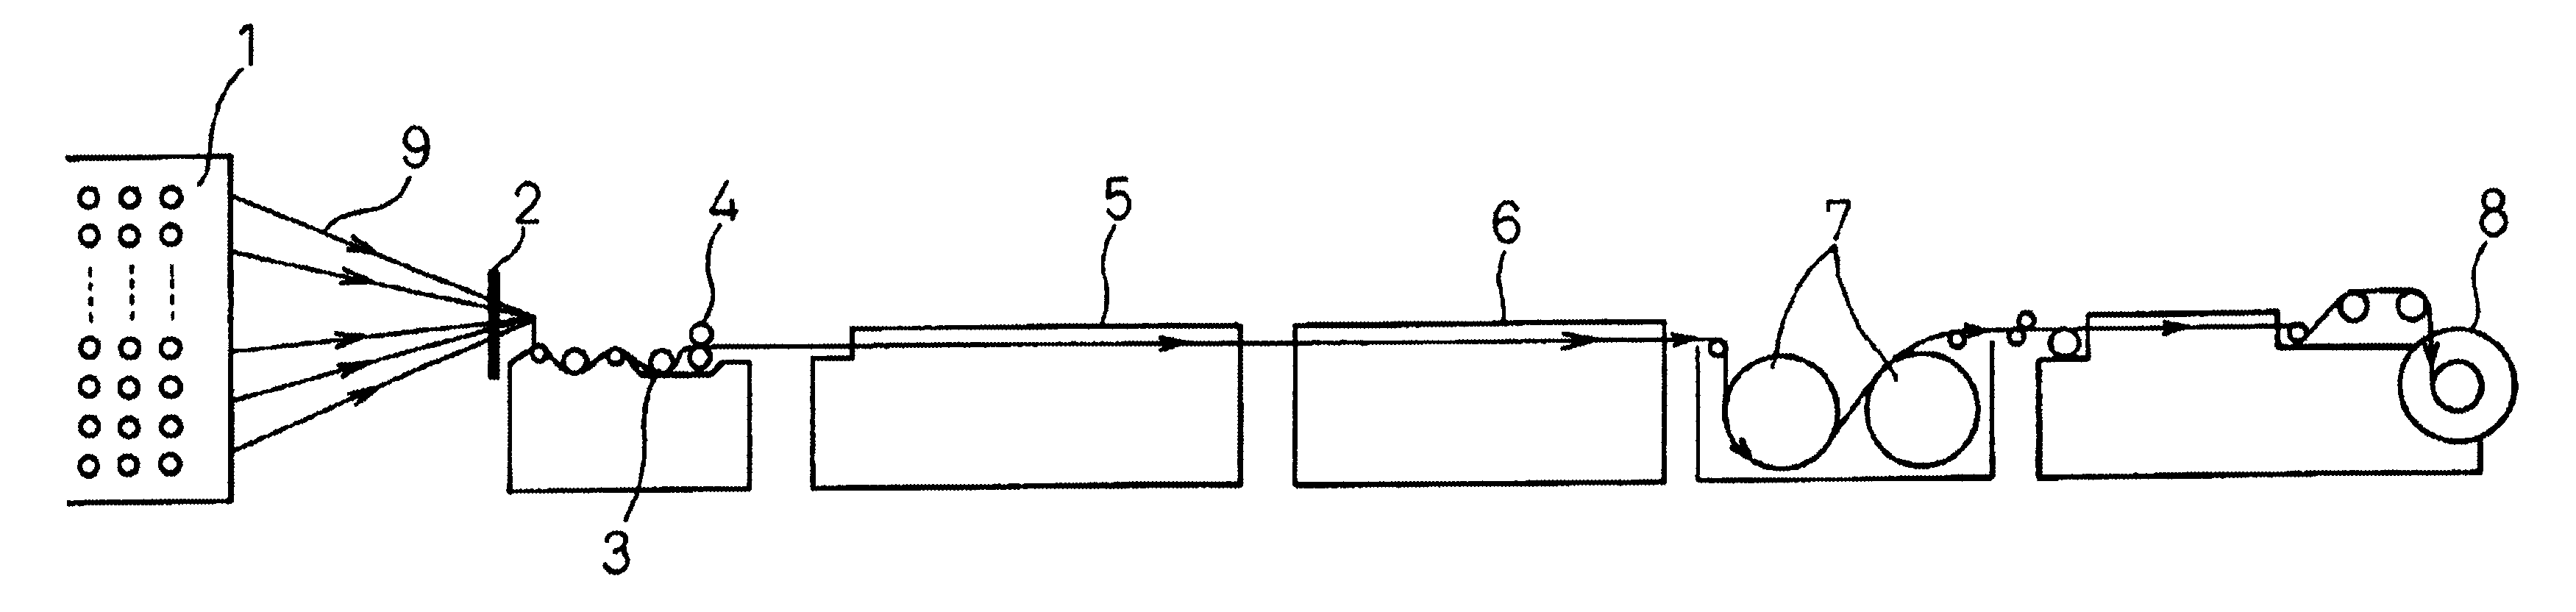 Beam for weaving and sizing method